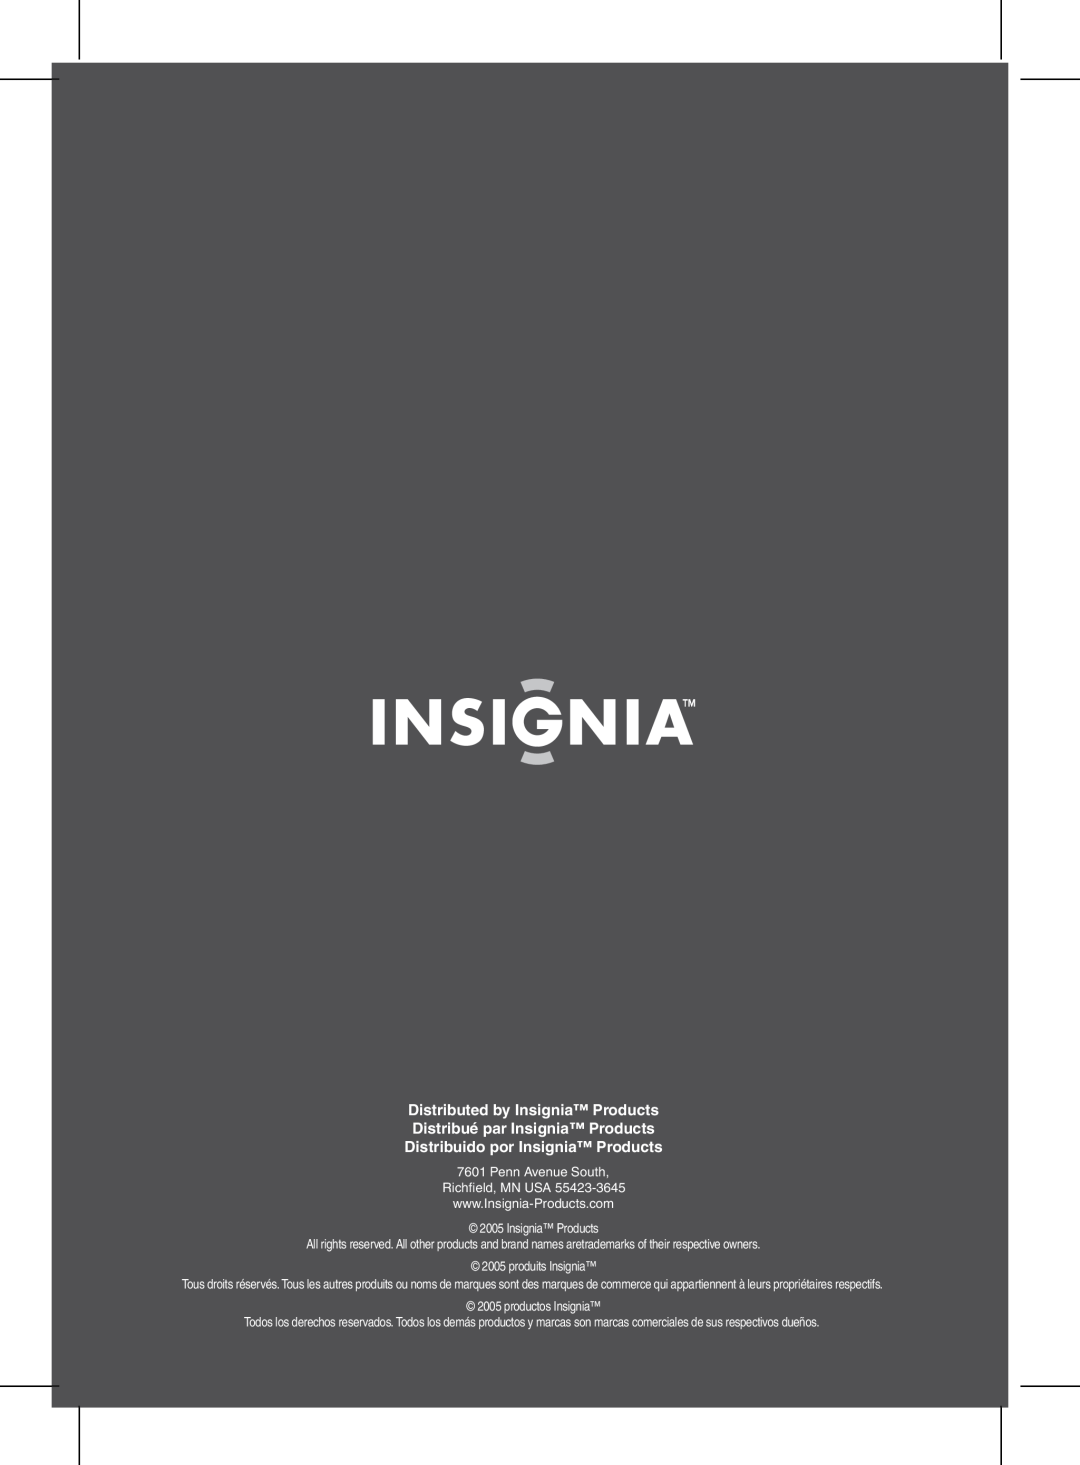 Insignia IS-SP102371 Distributed by Insignia Products, Distribué par Insignia Products, Distribuido por Insignia Products 